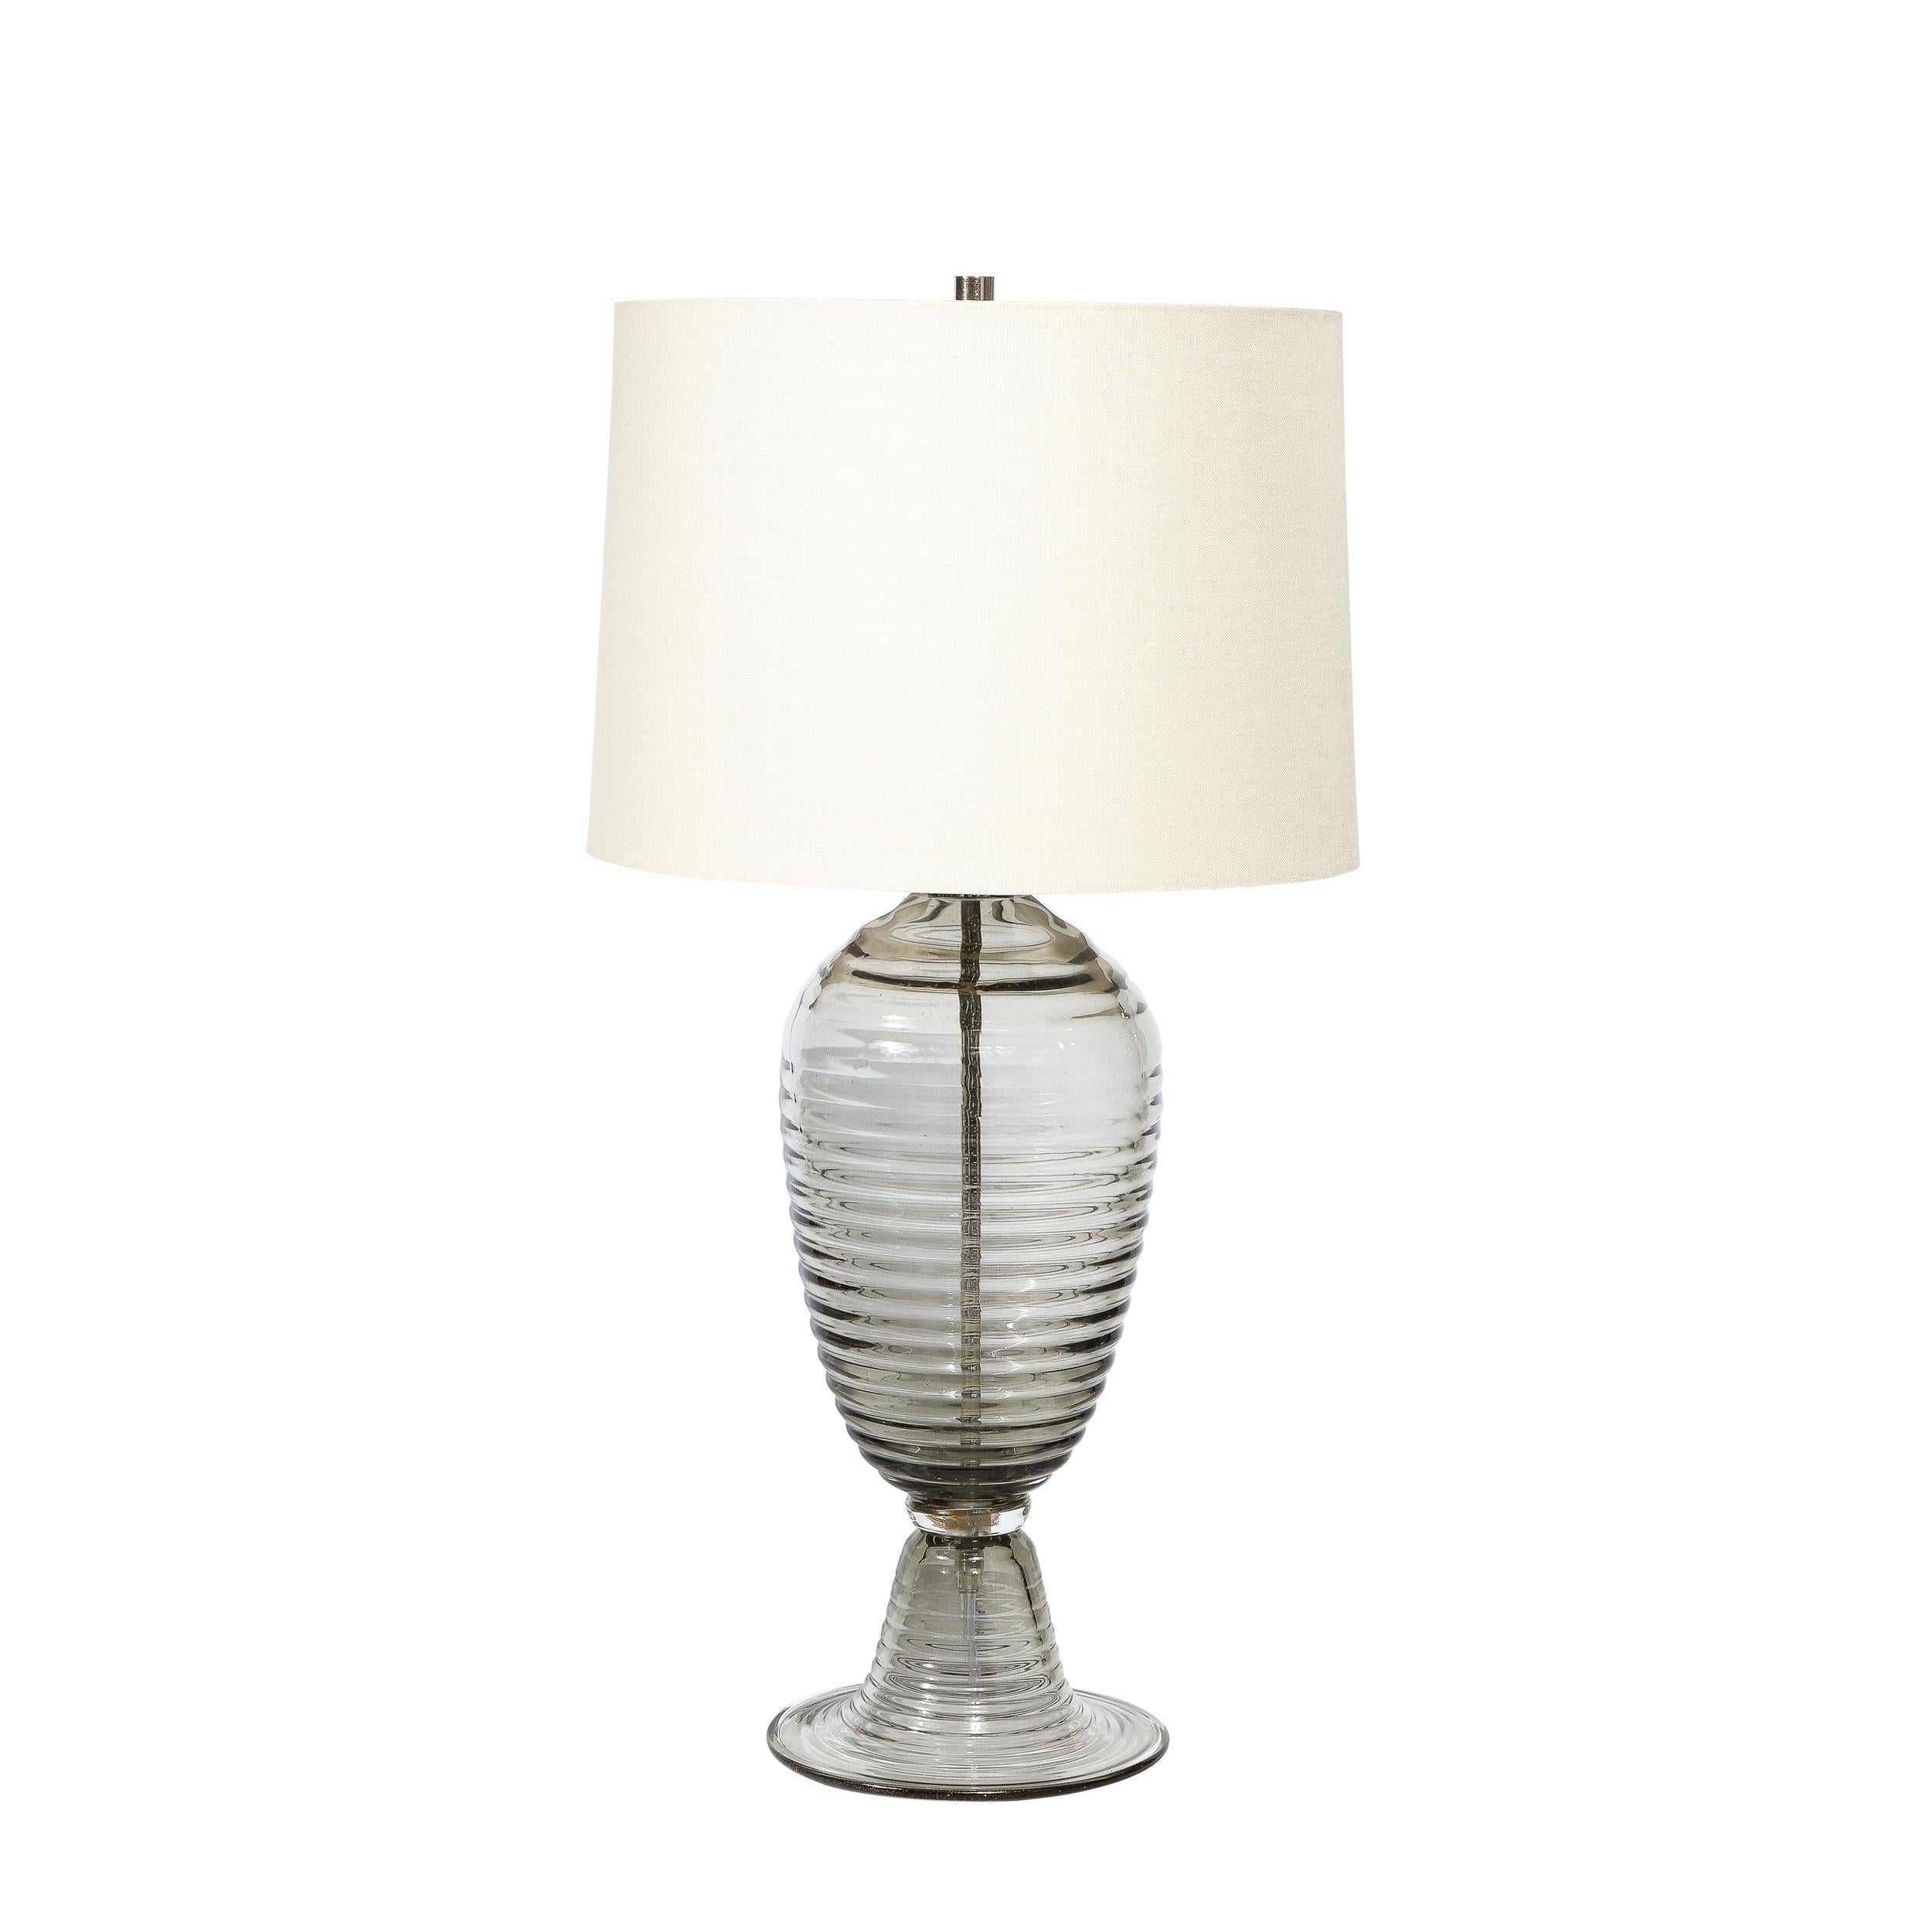 This pair of Modernist Hive Form Hand-Blown Murano Smoked Glass Table Lamps originates from Italy during the 21st Century. Featuring a beautiful profile with horizontal grooved detailing throughout the body of the piece, rendered in a gorgeous and